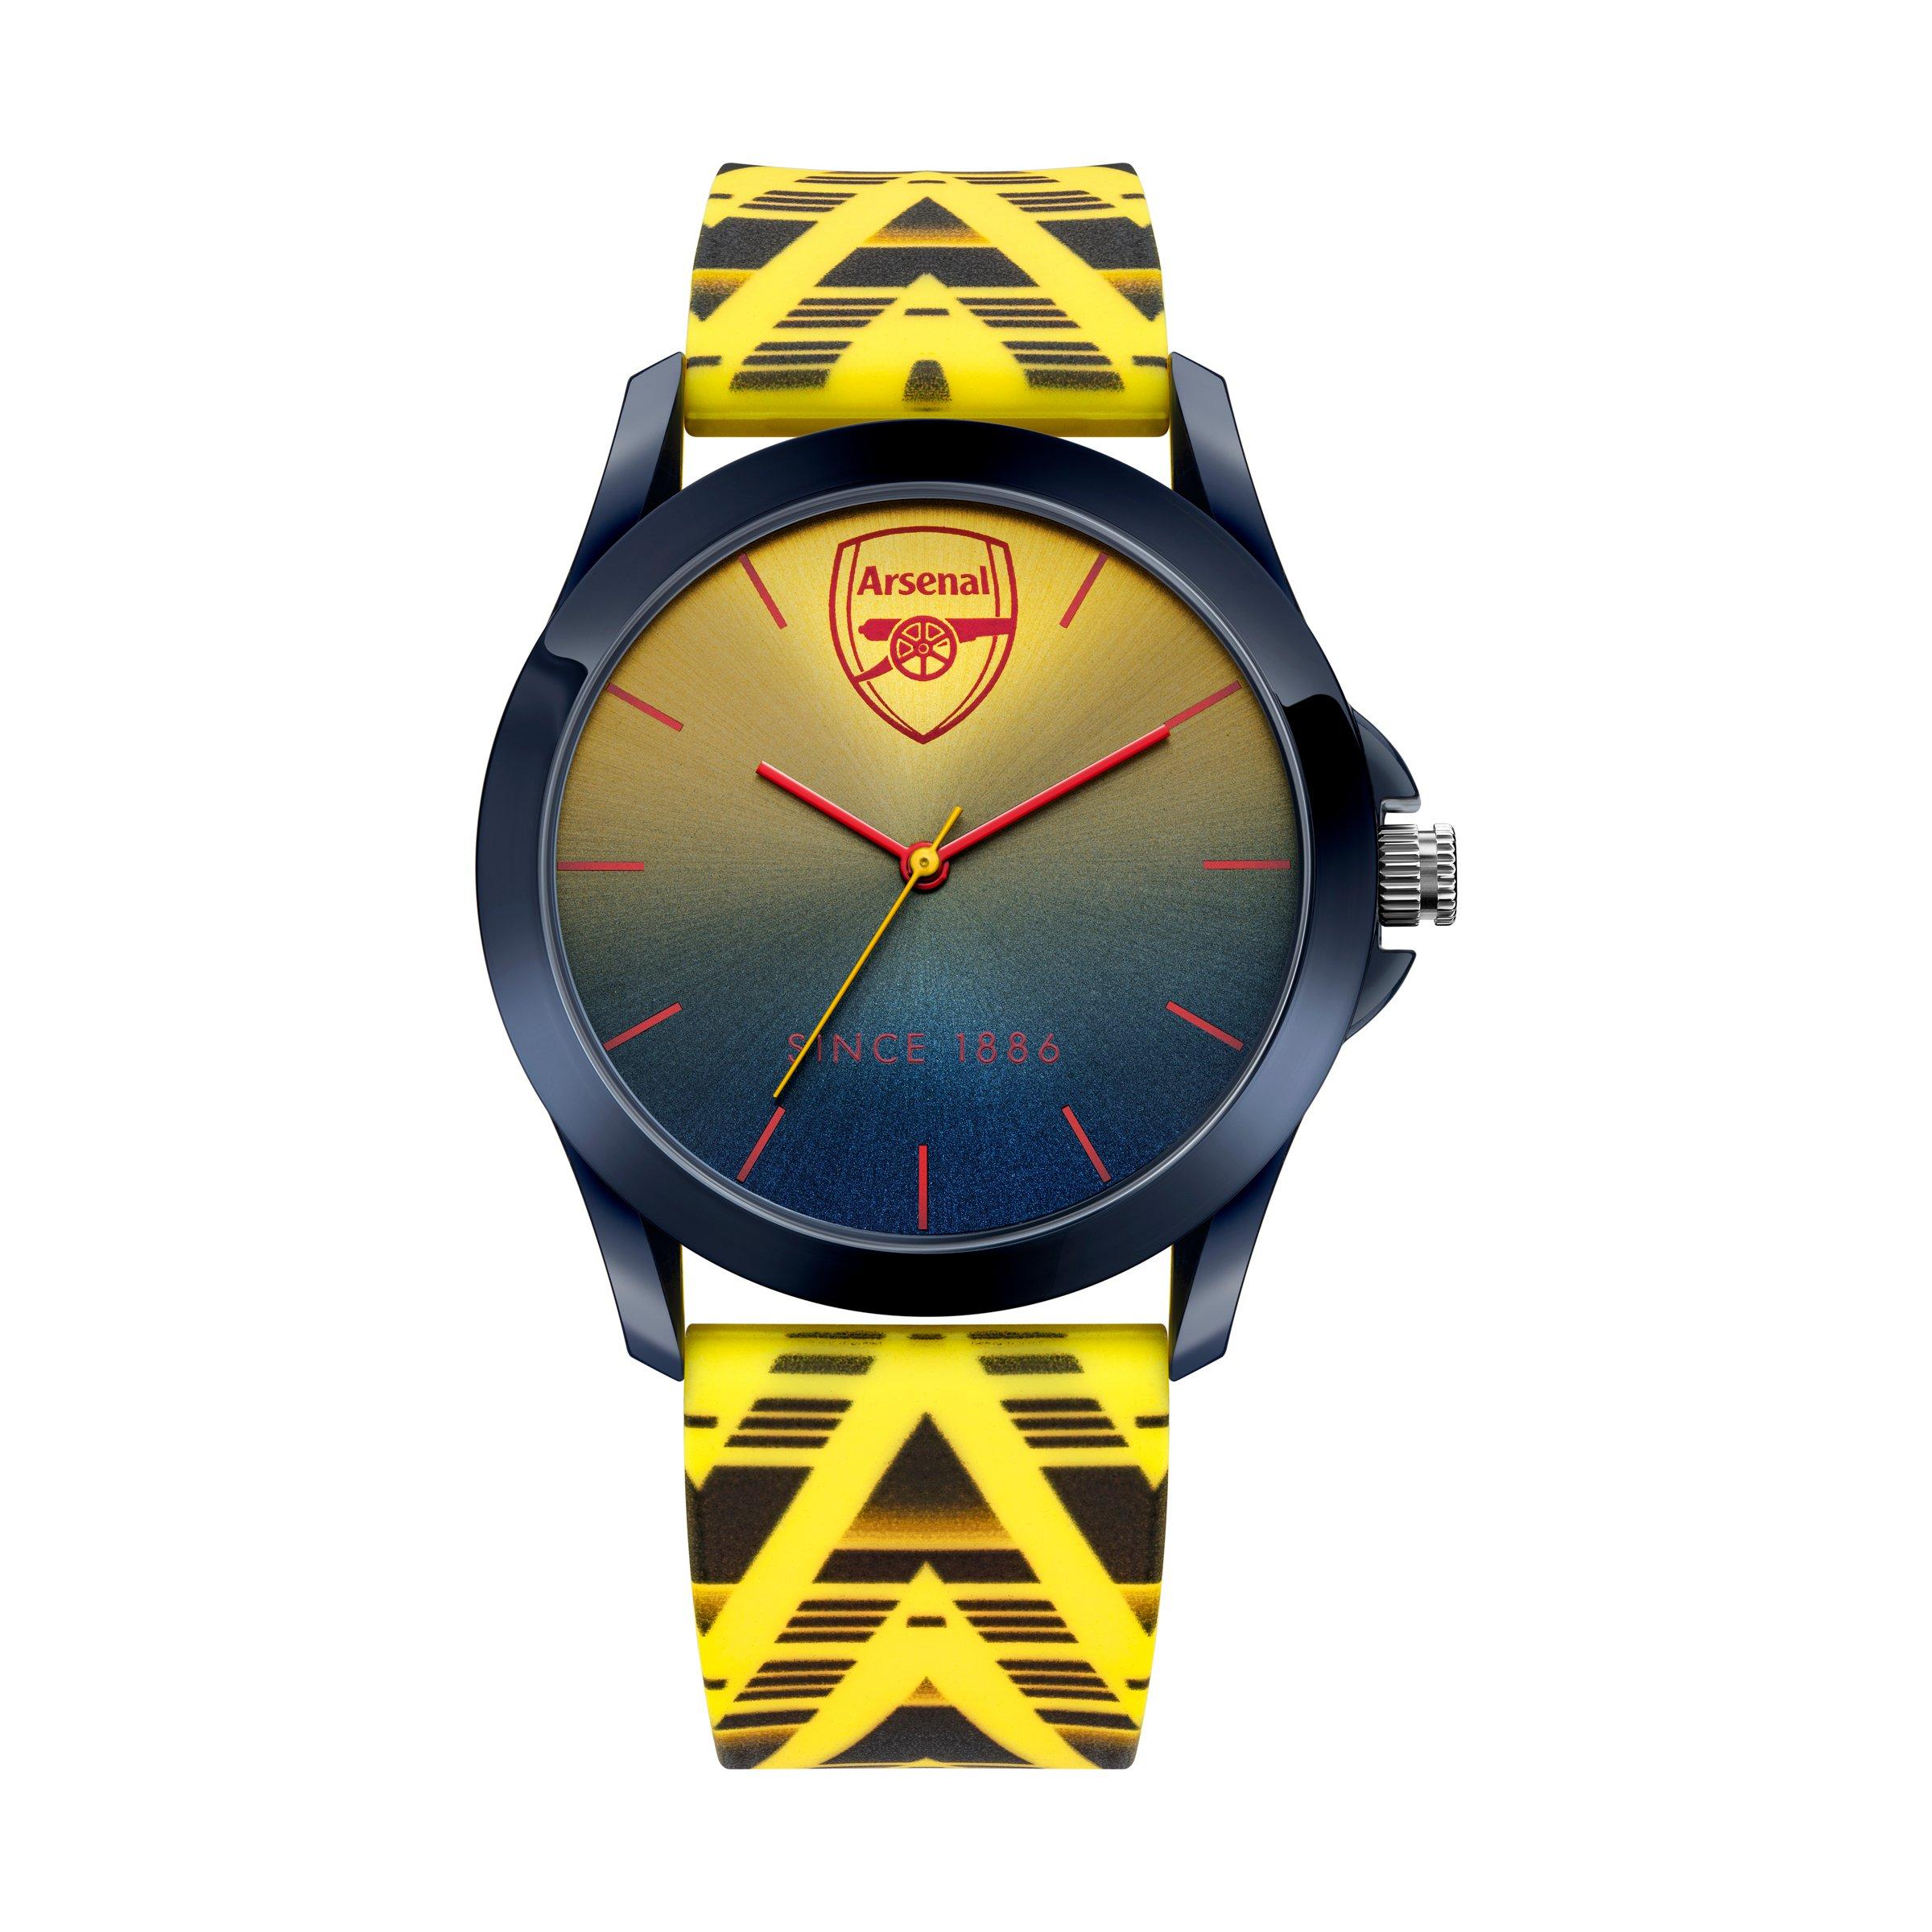 A set of 2 watches, Lasco and Arsenal. Clocks & Watches - Wristwatches -  Auctionet